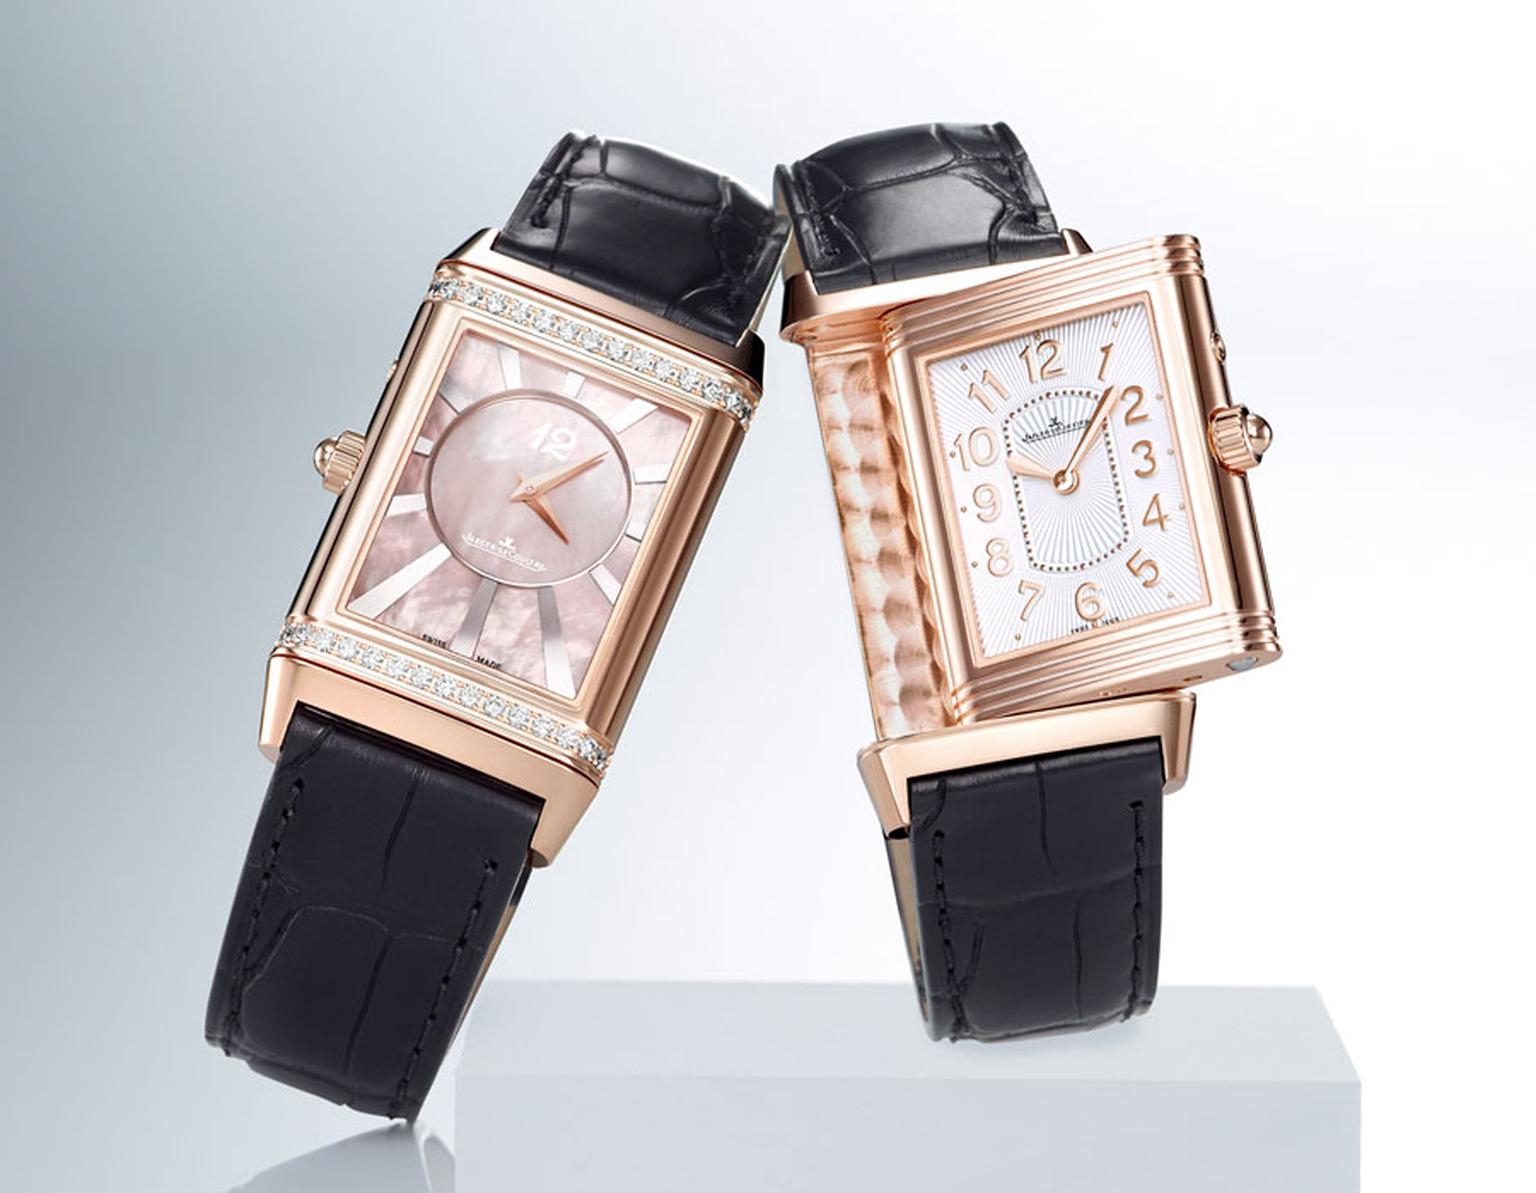 Jaeger-LeCoultre-Grande_Reverso_Lady_Ultra_Thin_Duetto_Duo_PG.jpg